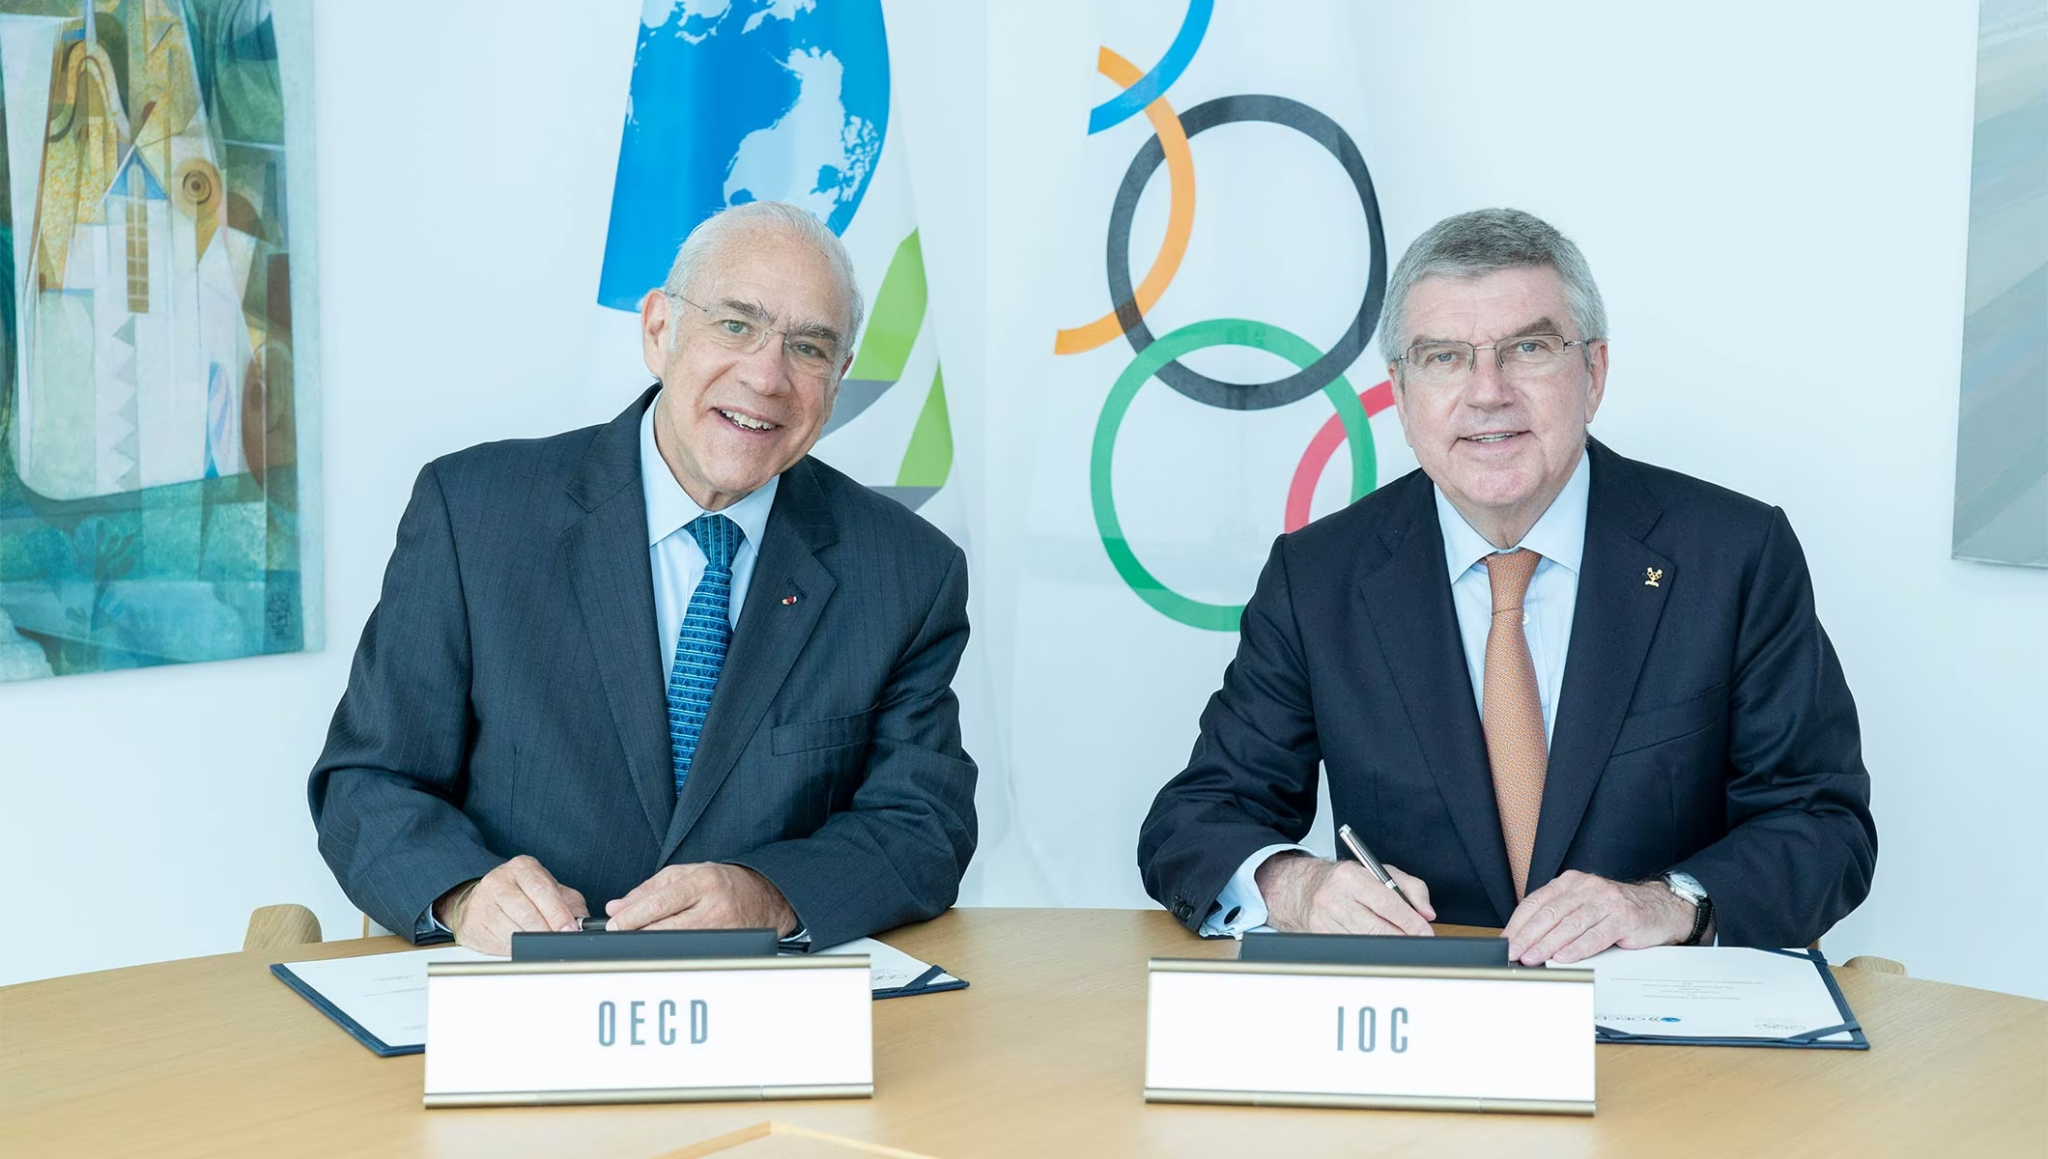 The International Olympic Committee started to work with the Organisation for Economic Co-operation and Development in 2019 ©IOC